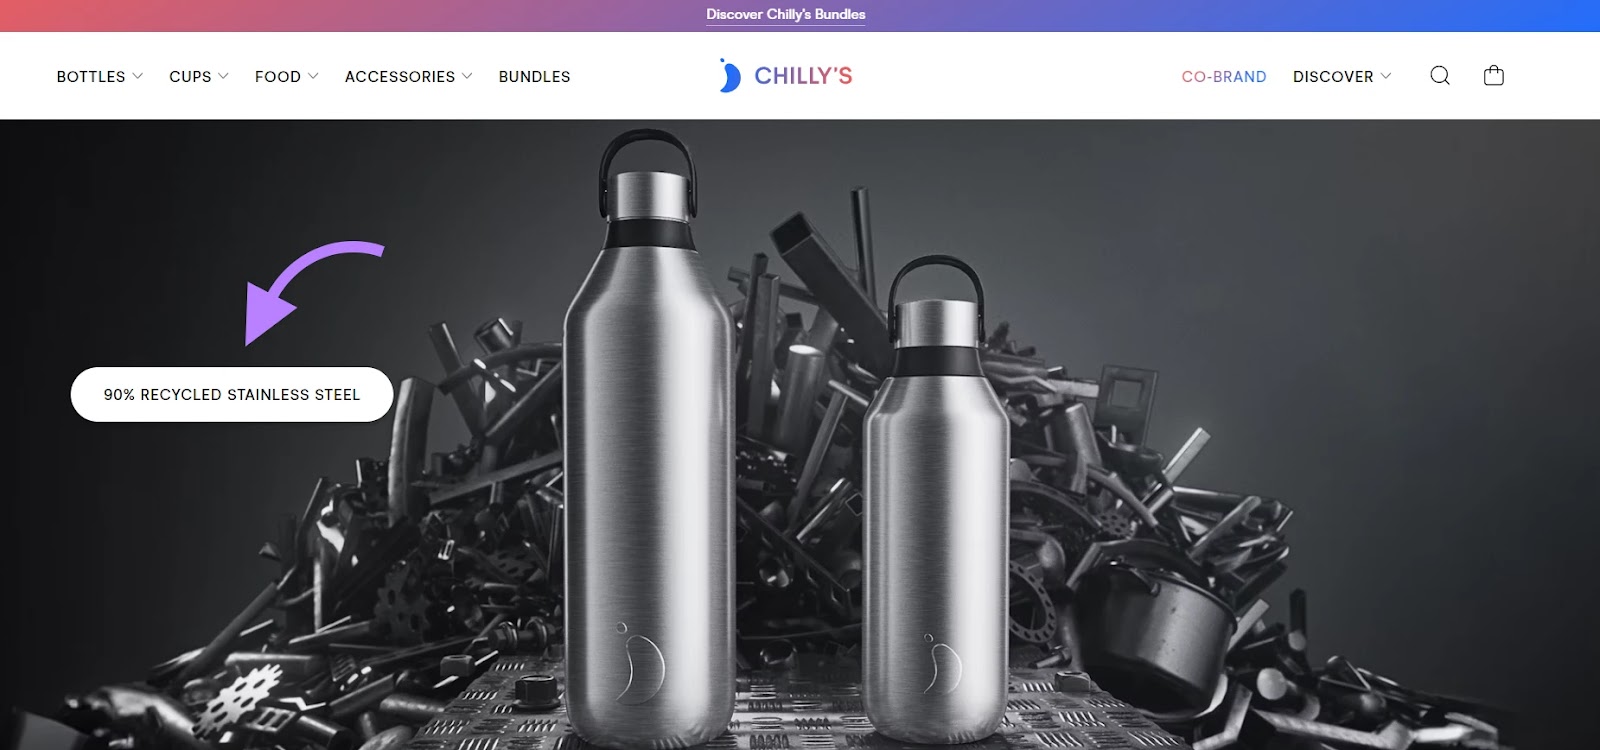 Chilly's homepage top header image showing two reusable bottles with a label saying "90% recycled stainless steel".